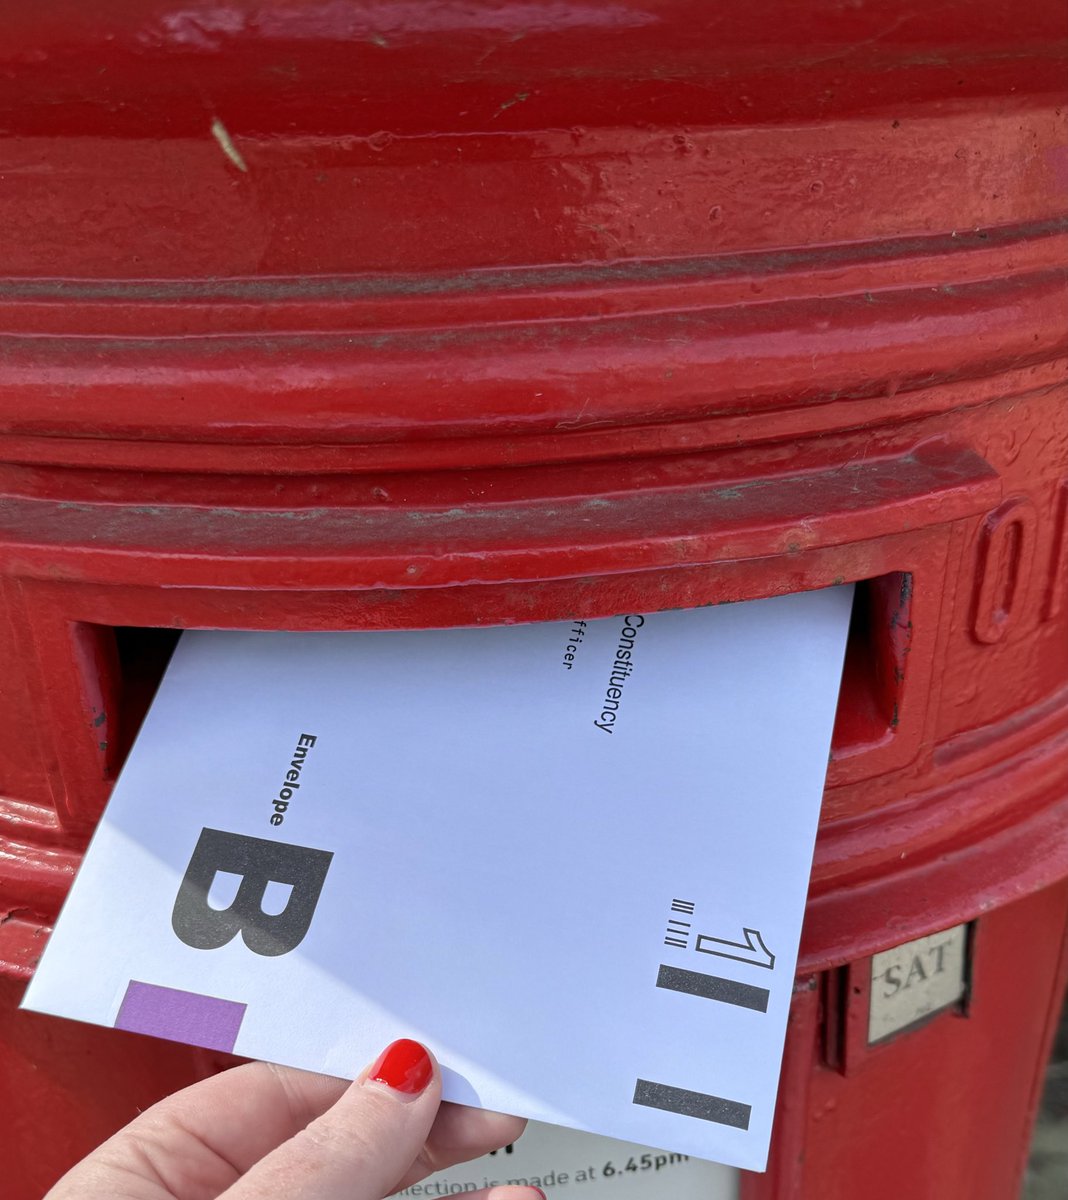 🗳️ I’ve voted for @UKLabour. Have you? Post your ballot back asap